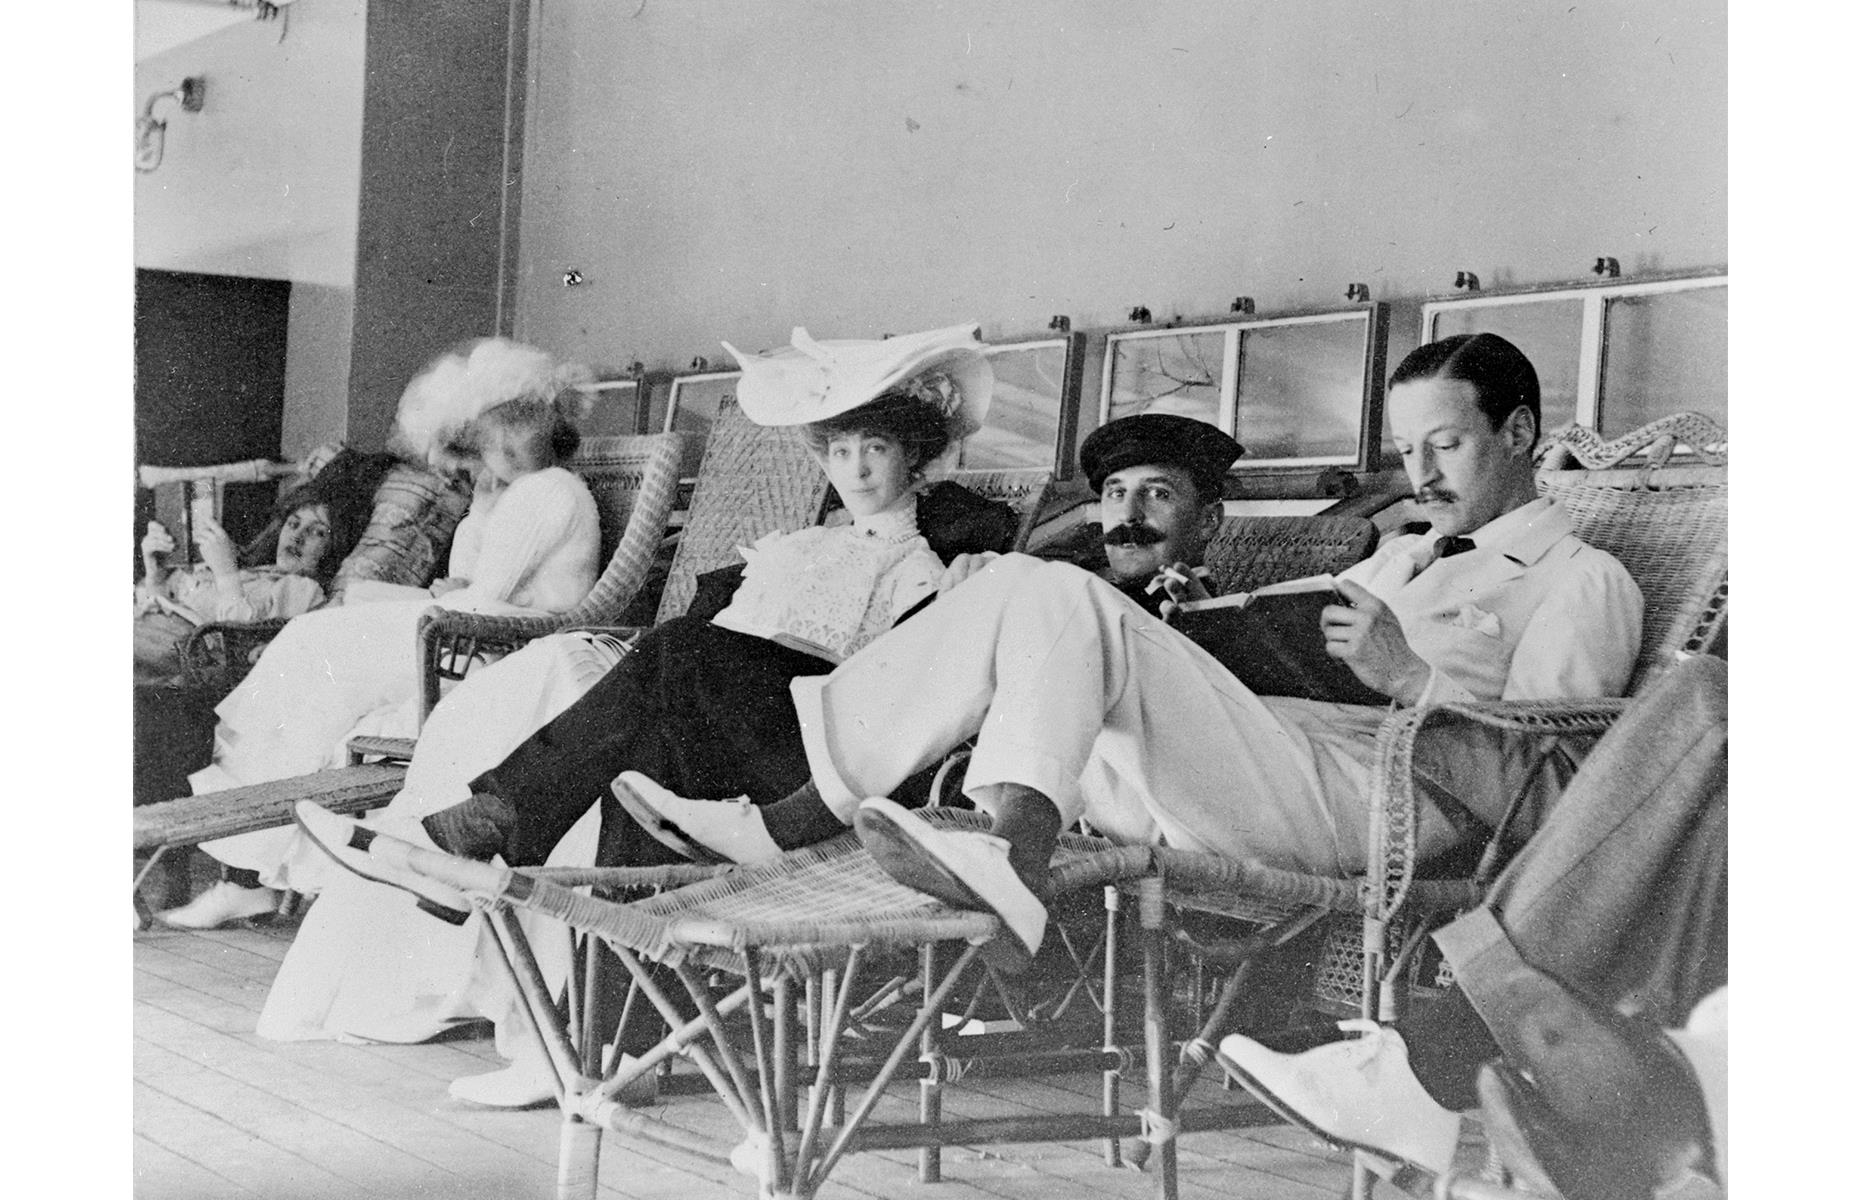 The period from the 1900s to the end of the 1930s is what many consider cruising’s golden age. By this point, the journey had become as important as the destination and passengers would don their finery to take to the seas for weeks on end. Here the Duke and Duchess of Marlborough relax on the deck of P&O's Arabia, en route to Mumbai in 1902.